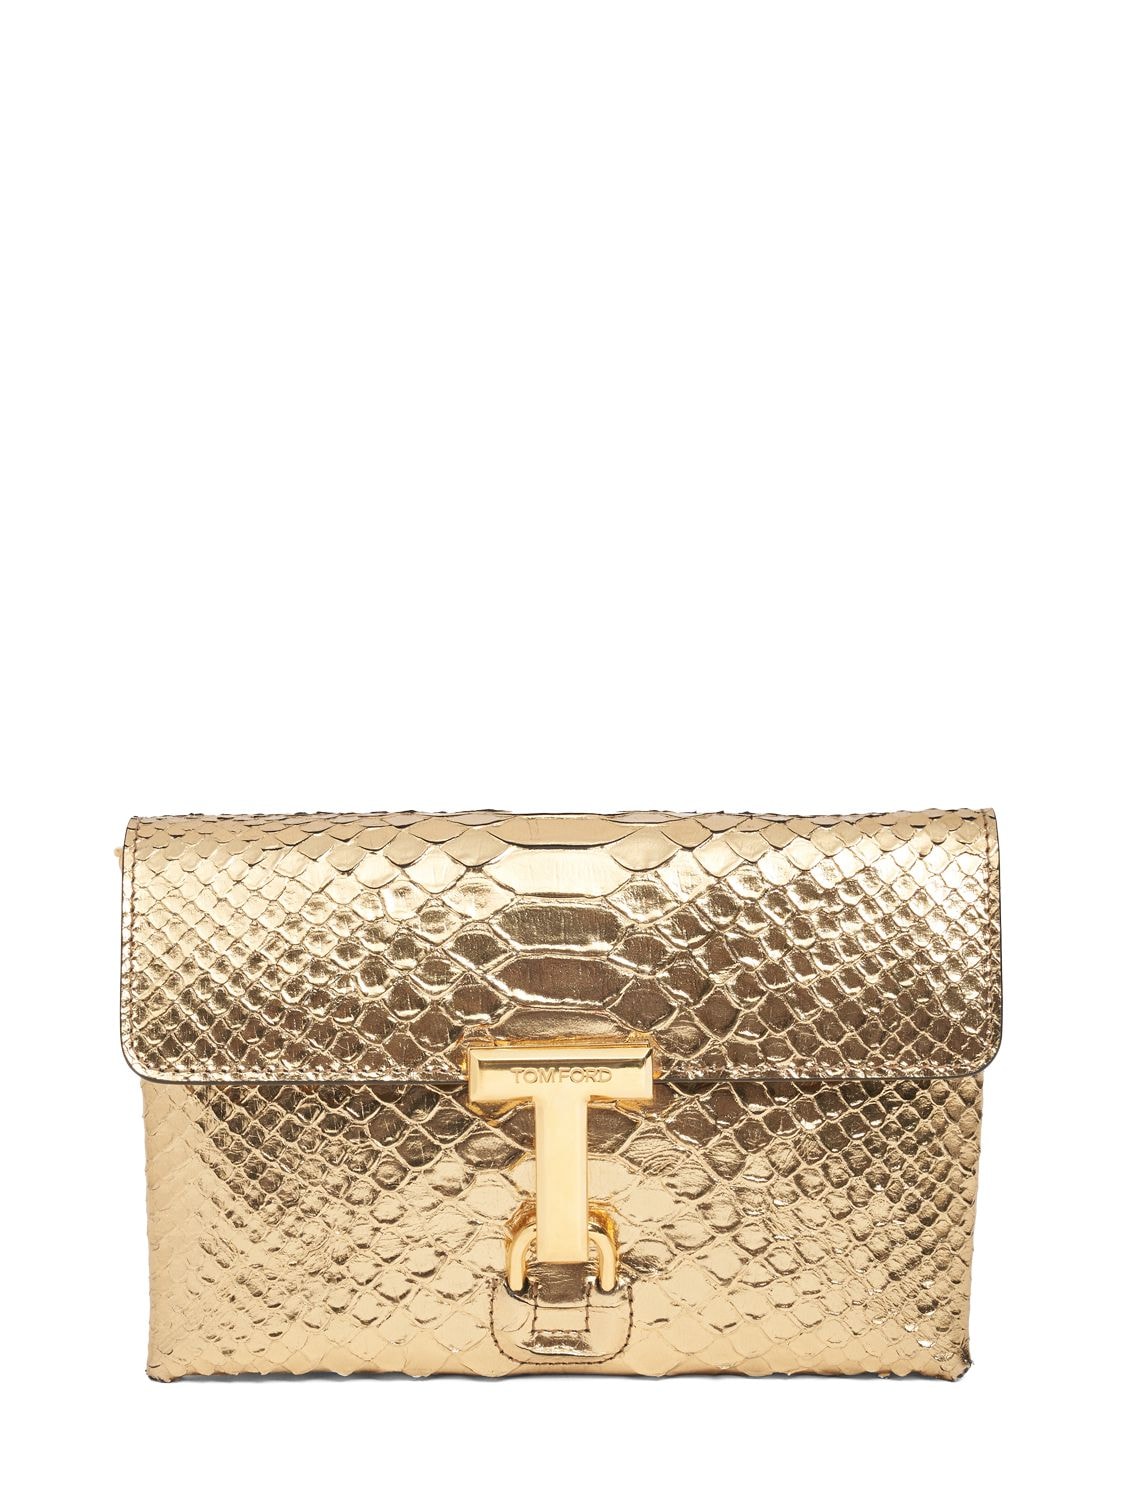 Tom Ford Mini Embossed Laminated Leather Bag In Dark Gold